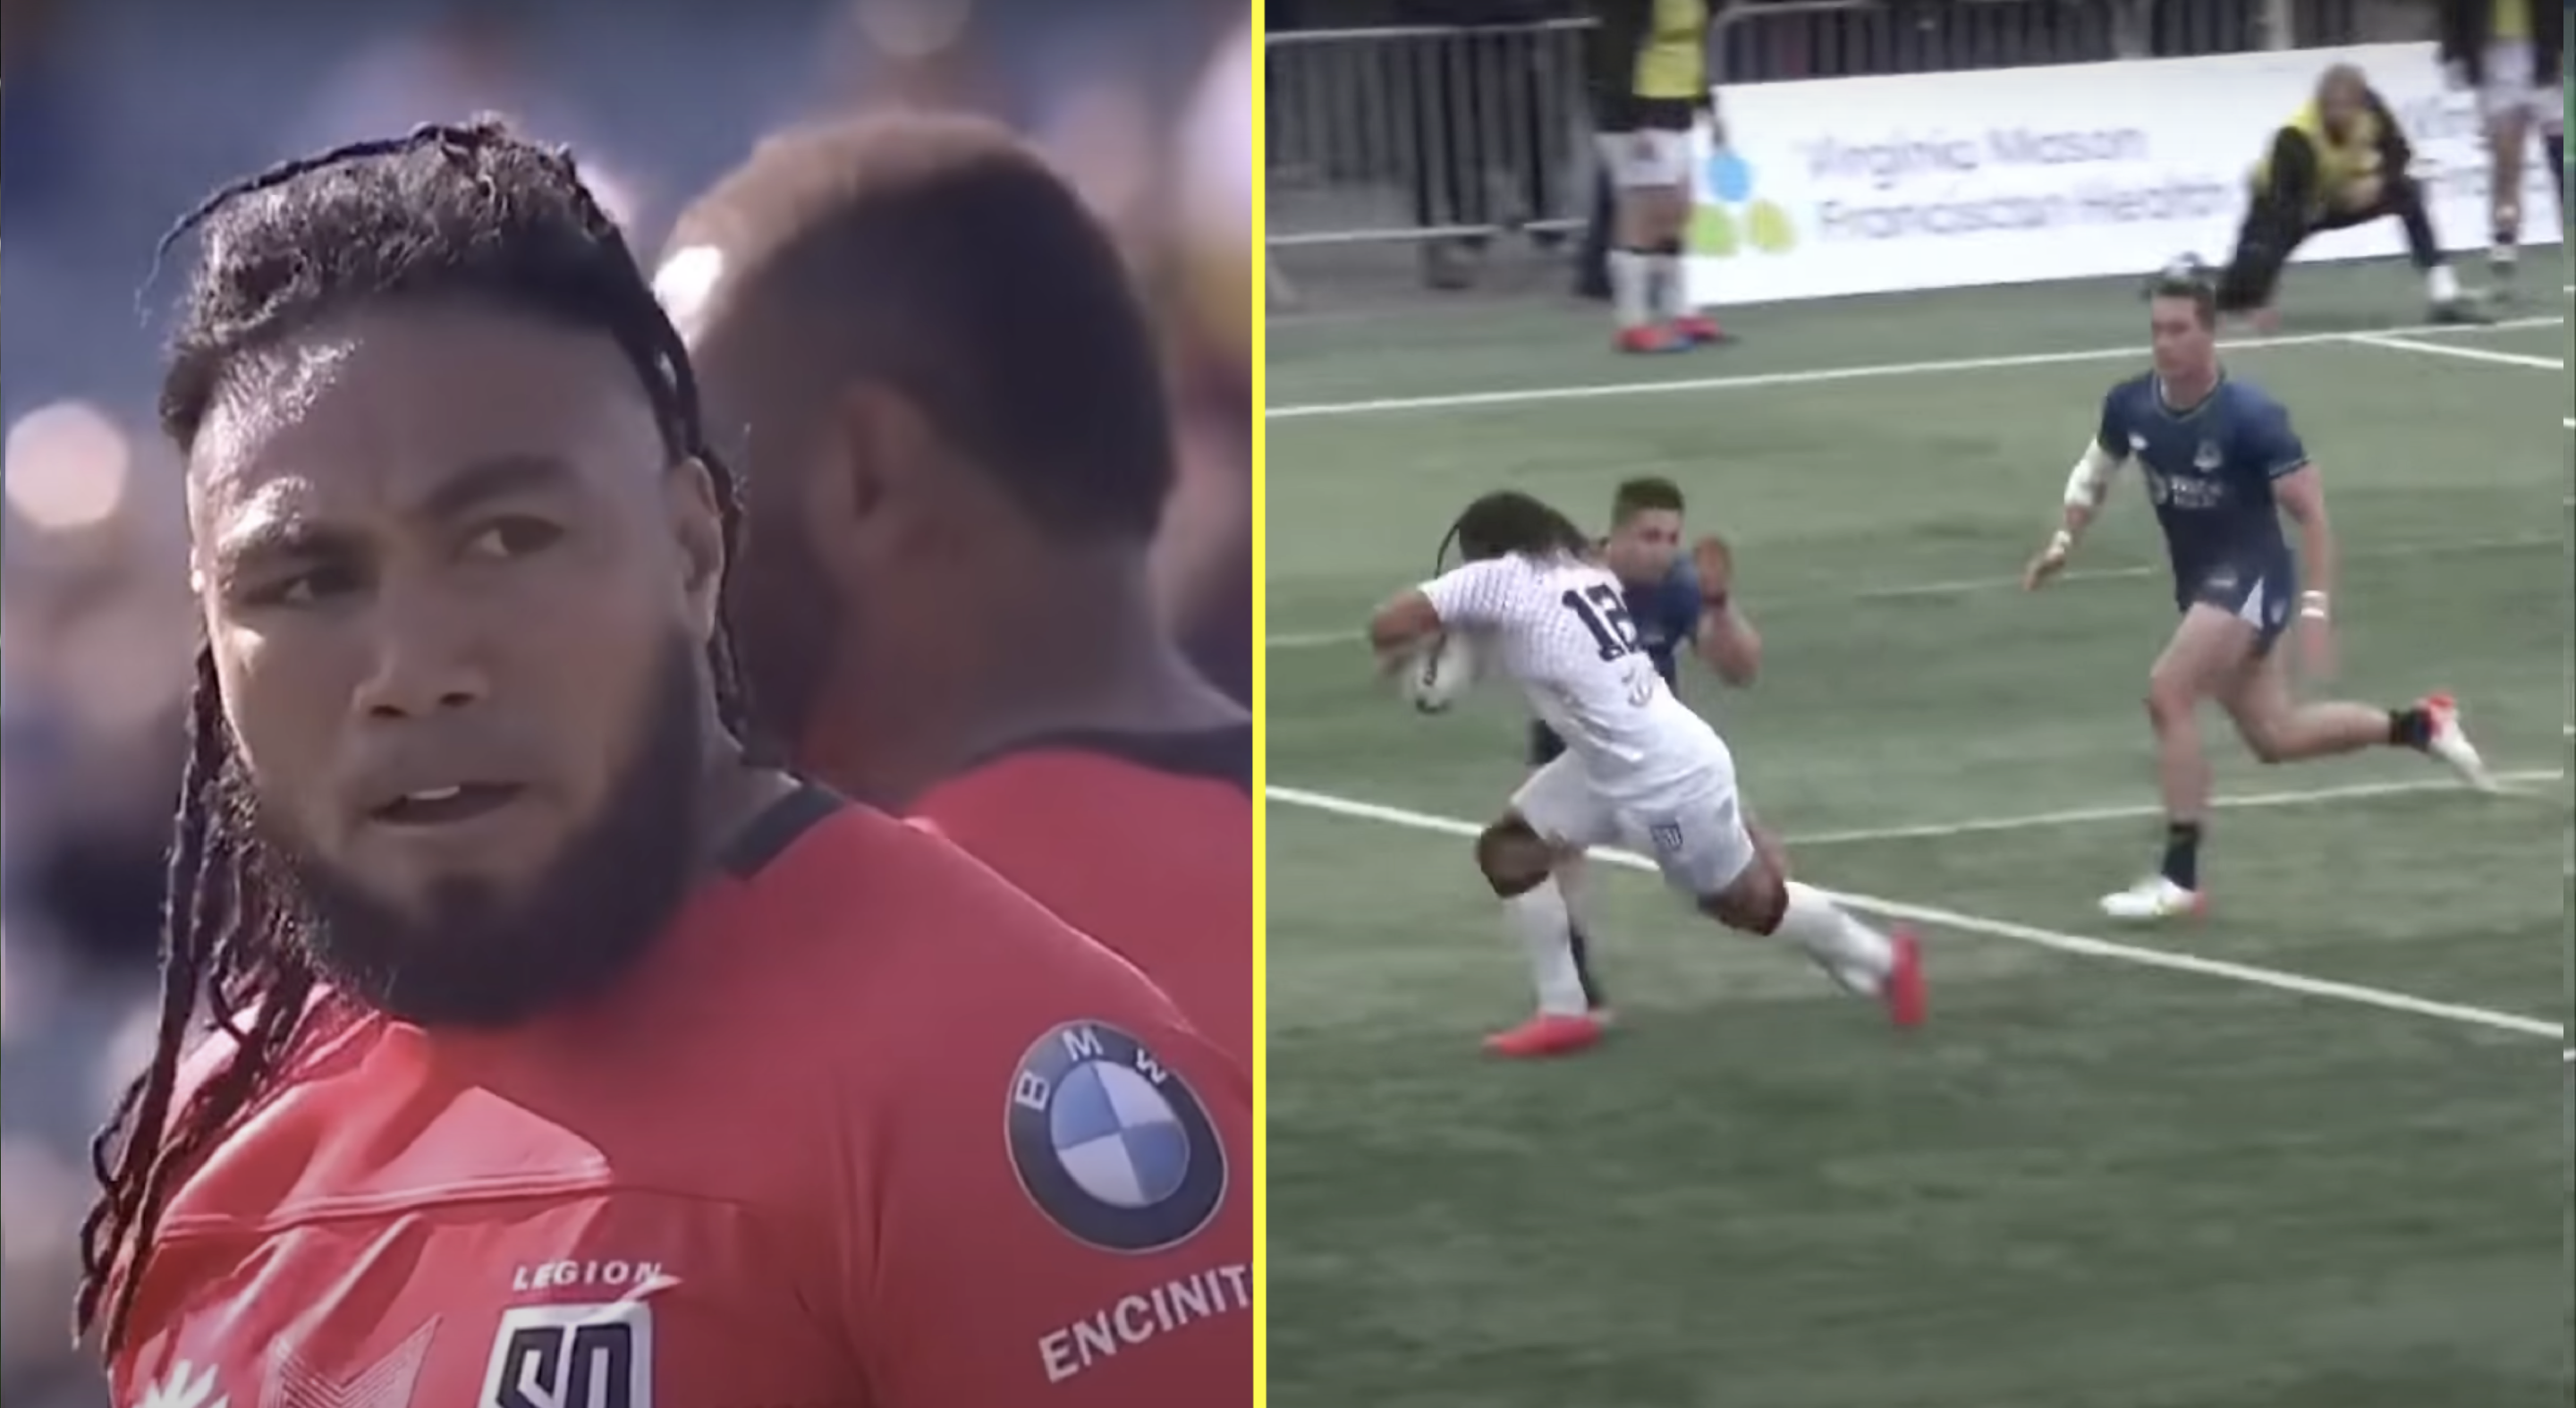 Ma'a Nonu shows off his world class skill in MLR at almost 40